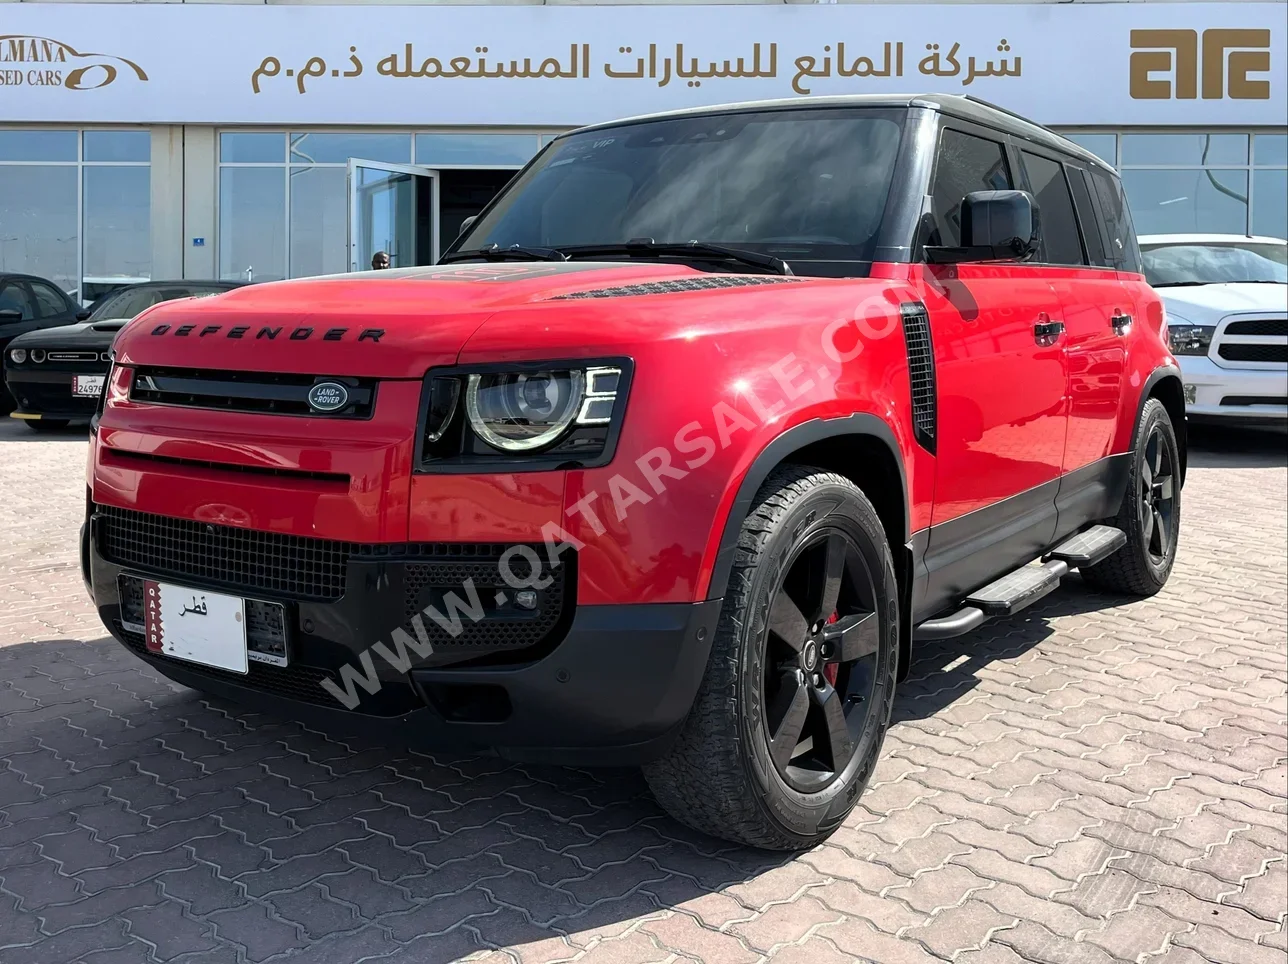 Land Rover  Defender  110  2022  Automatic  86,000 Km  6 Cylinder  Four Wheel Drive (4WD)  SUV  Red  With Warranty